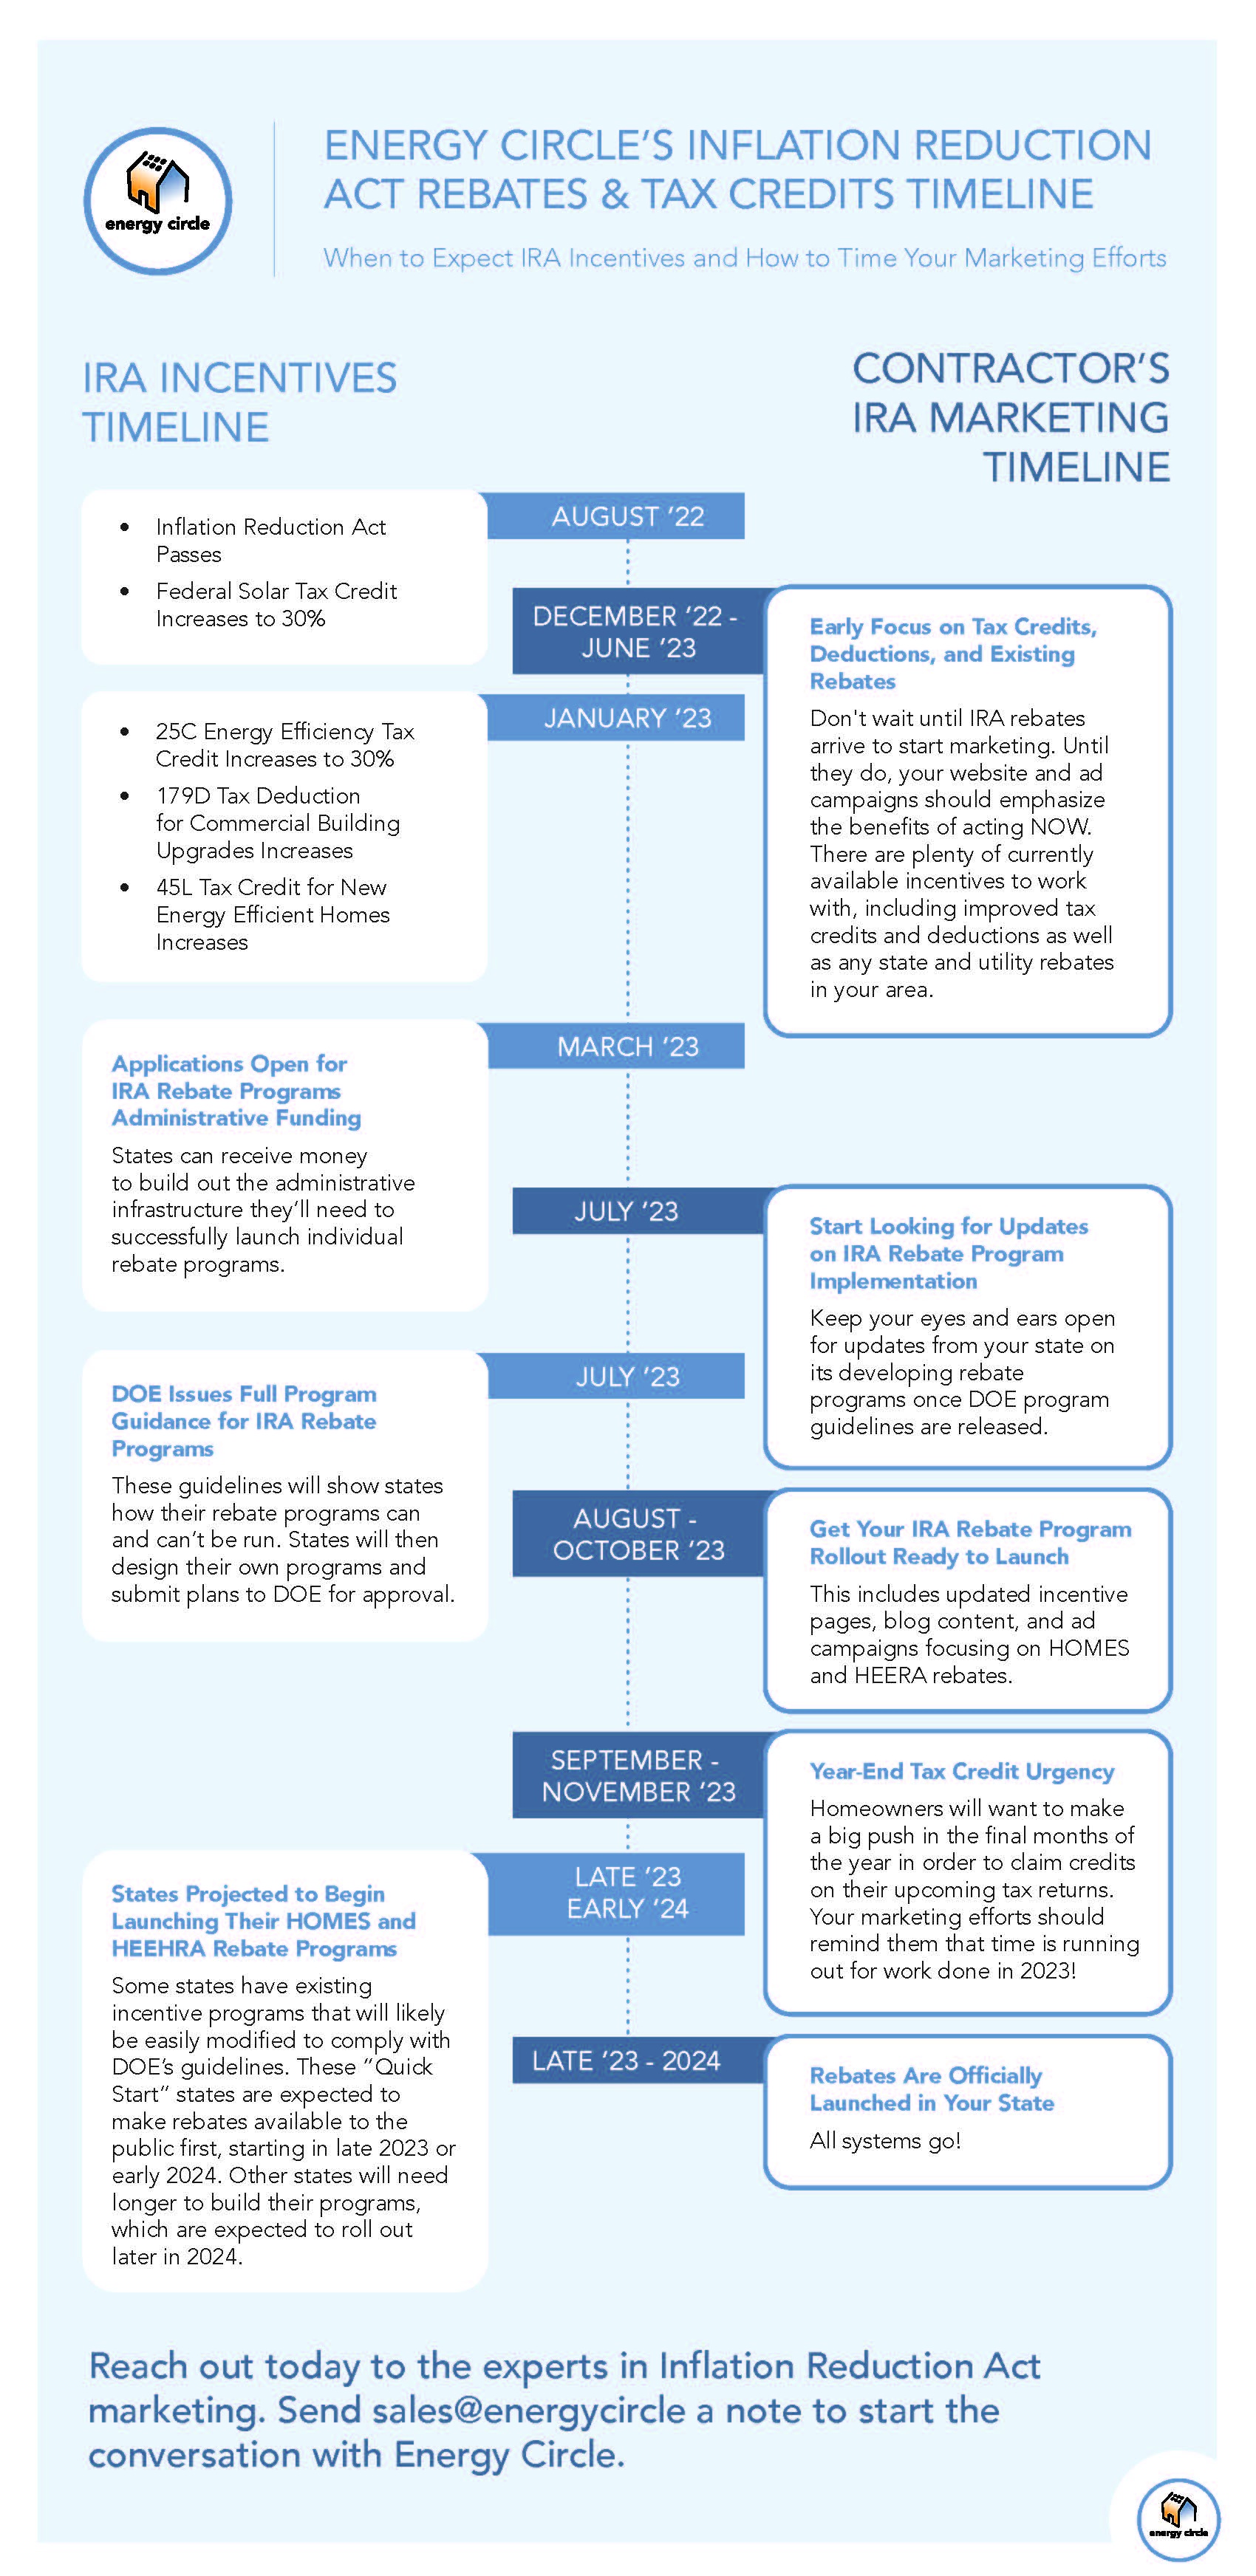 Energy Circle’s Inflation Reduction Act Rebates & Tax Credits Timeline infographic image